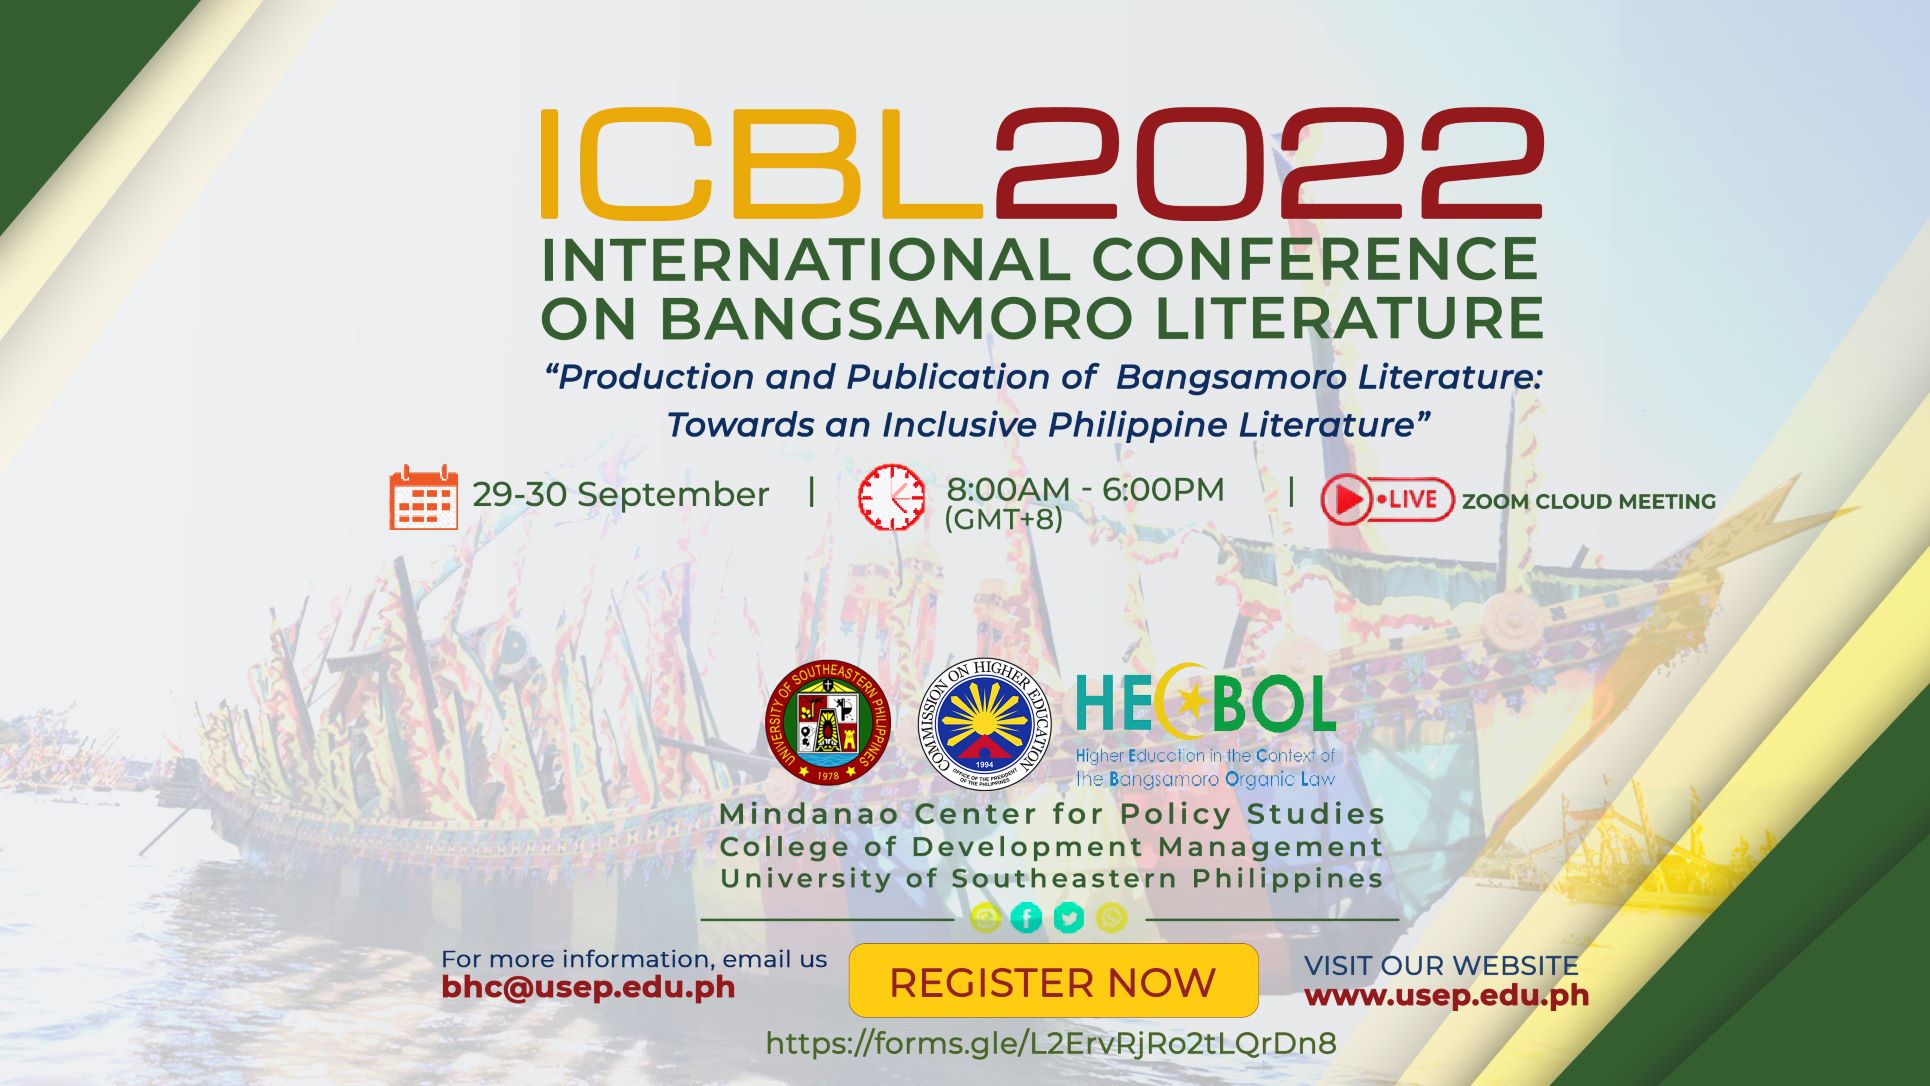 CALL FOR PARTICIPATION: International Conference on Bangsamoro Literature on 29-30 September 2022 via Zoom